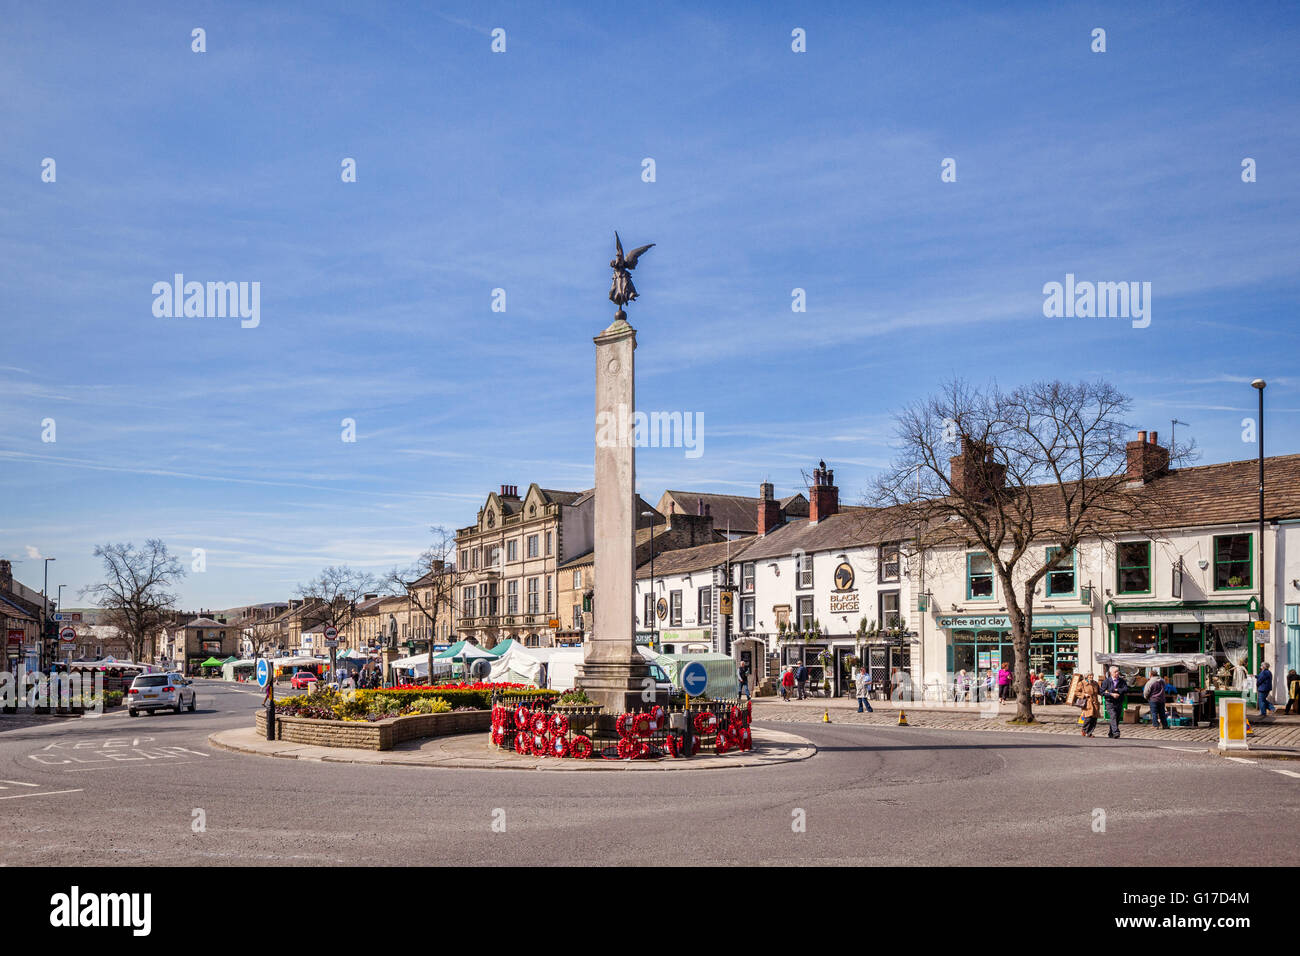 Market Day in High Street, Skipton, North Yorkshire, looking south from the War Memorial. Stock Photo